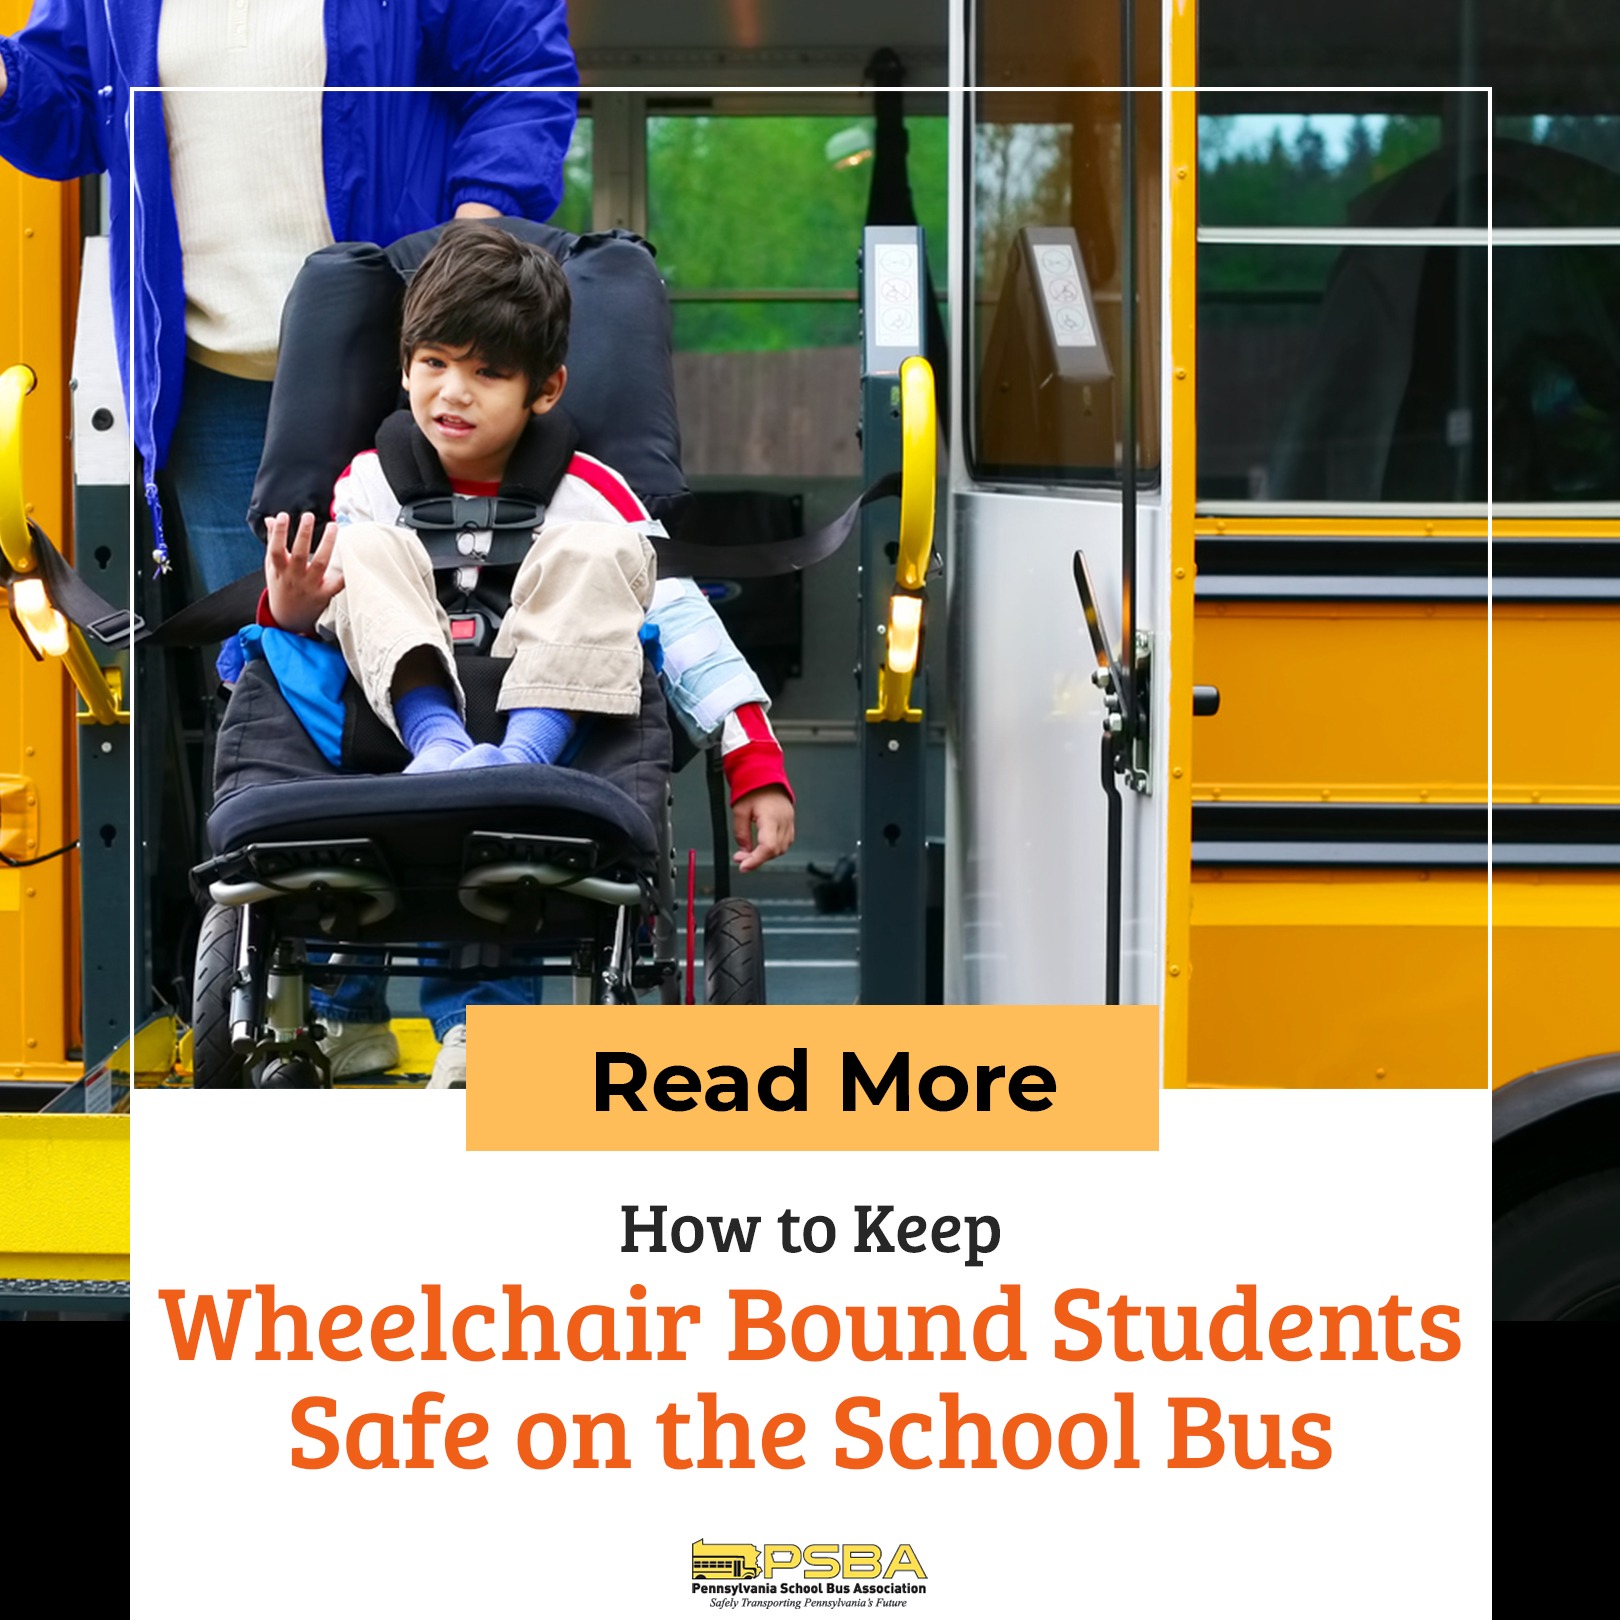 How to Keep Wheelchair-Bound Students Safe on the School Bus